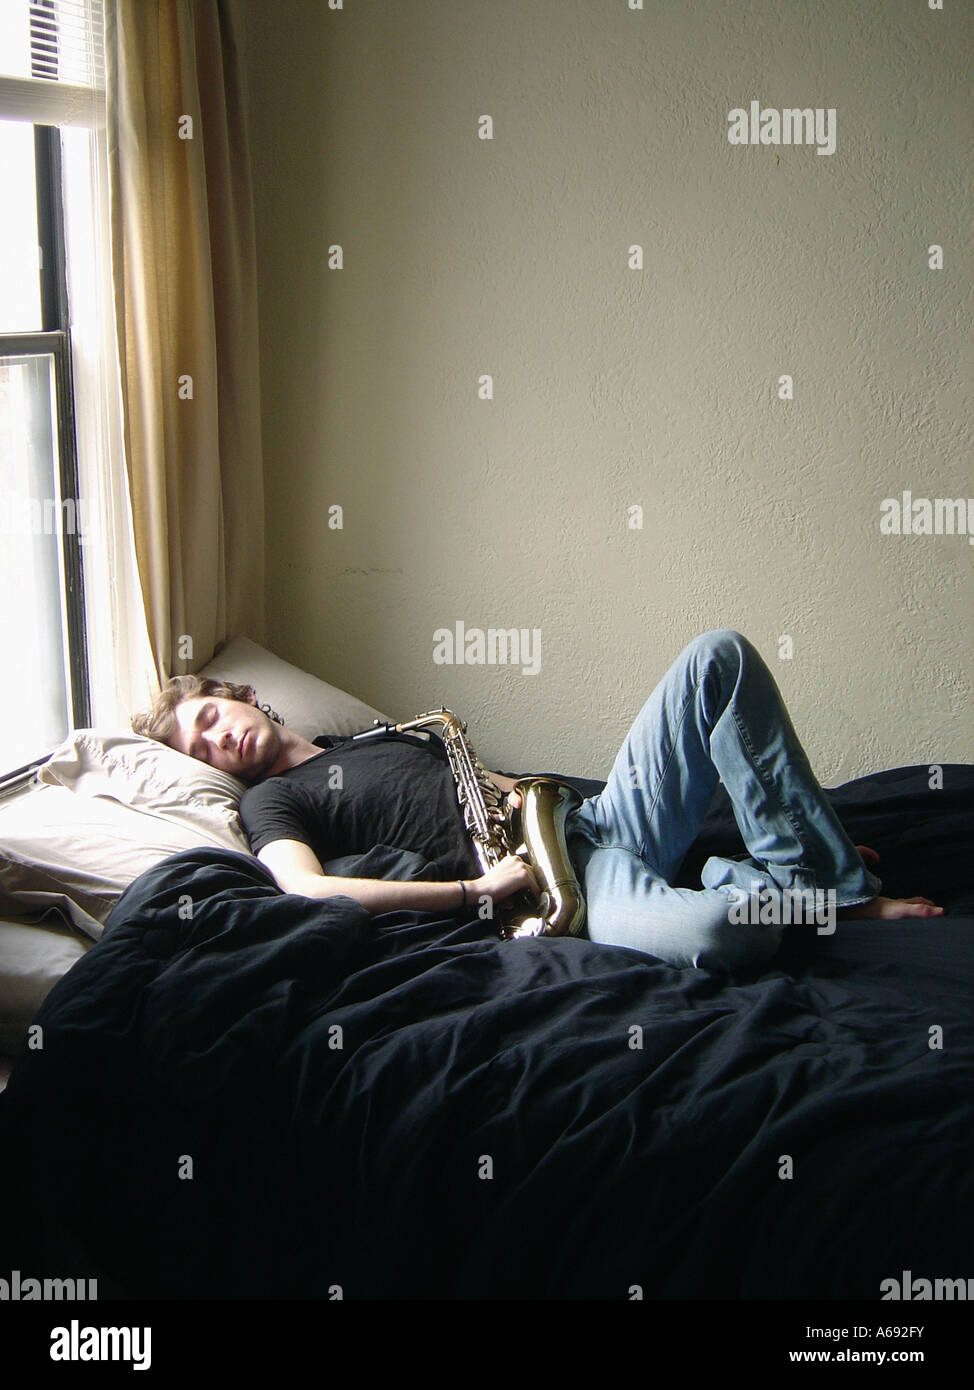 Portrait of Sleeping Man Lying in Bed With a Saxophone He is Wearing Blue Jeans And A Black Tee Shirt t shirt Stock Photo